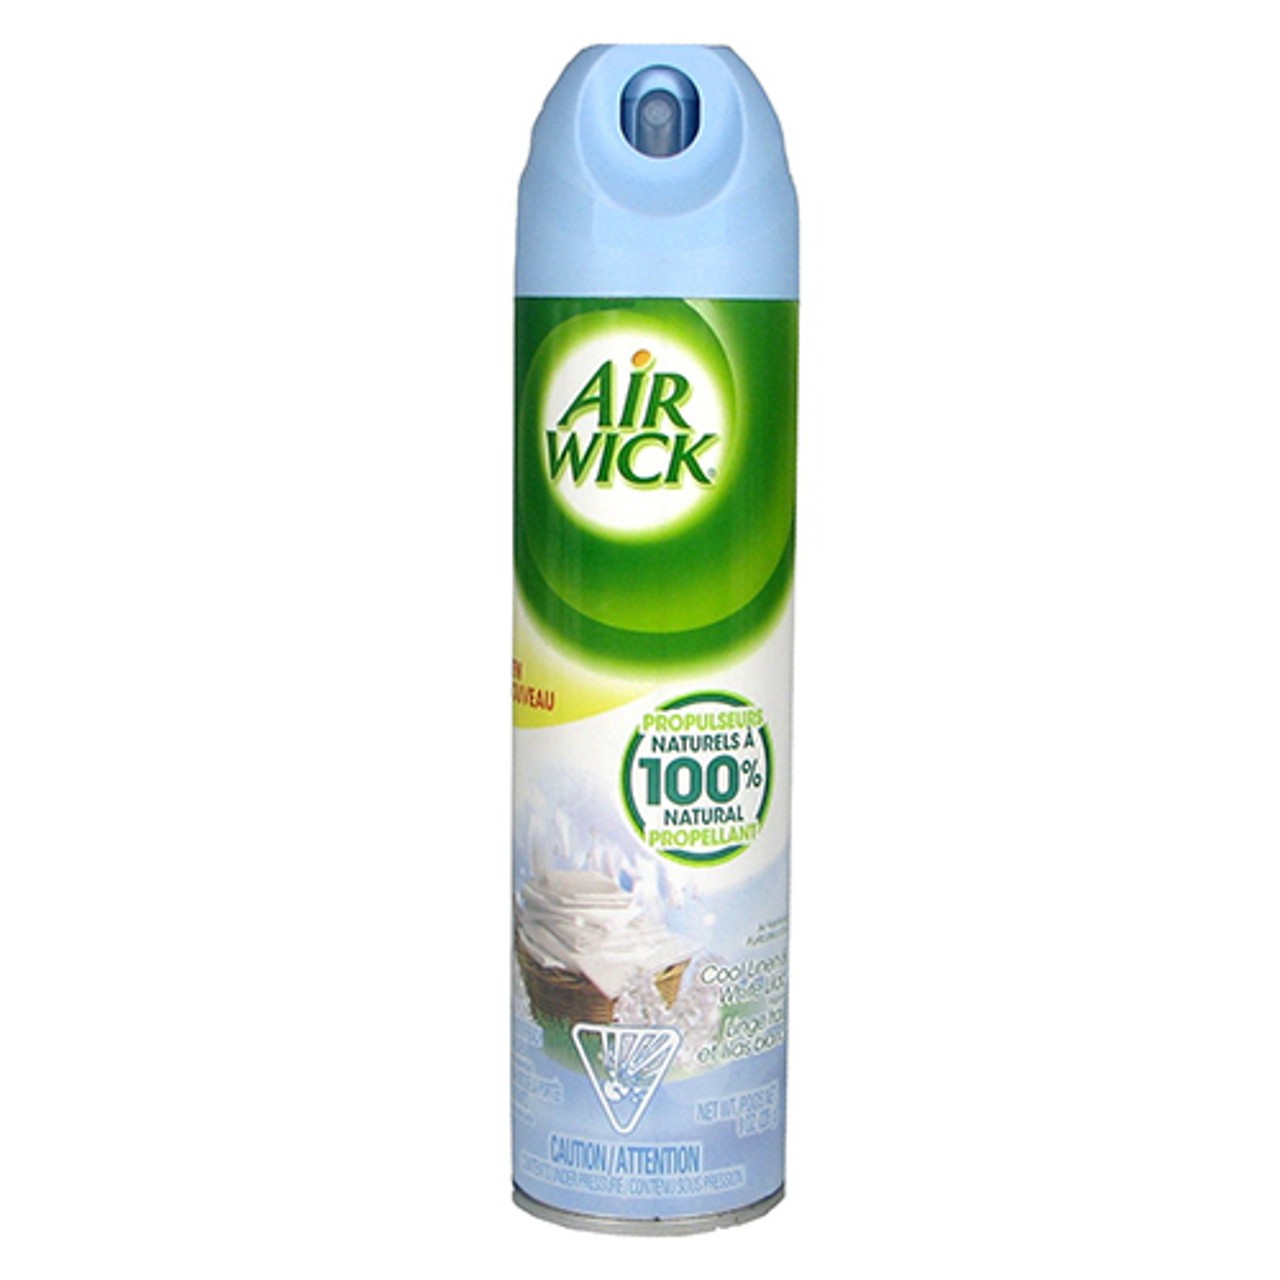 Air Wick Aerosol Spray Air Freshener, Cool Linen and White Lilac, 8 Ounce